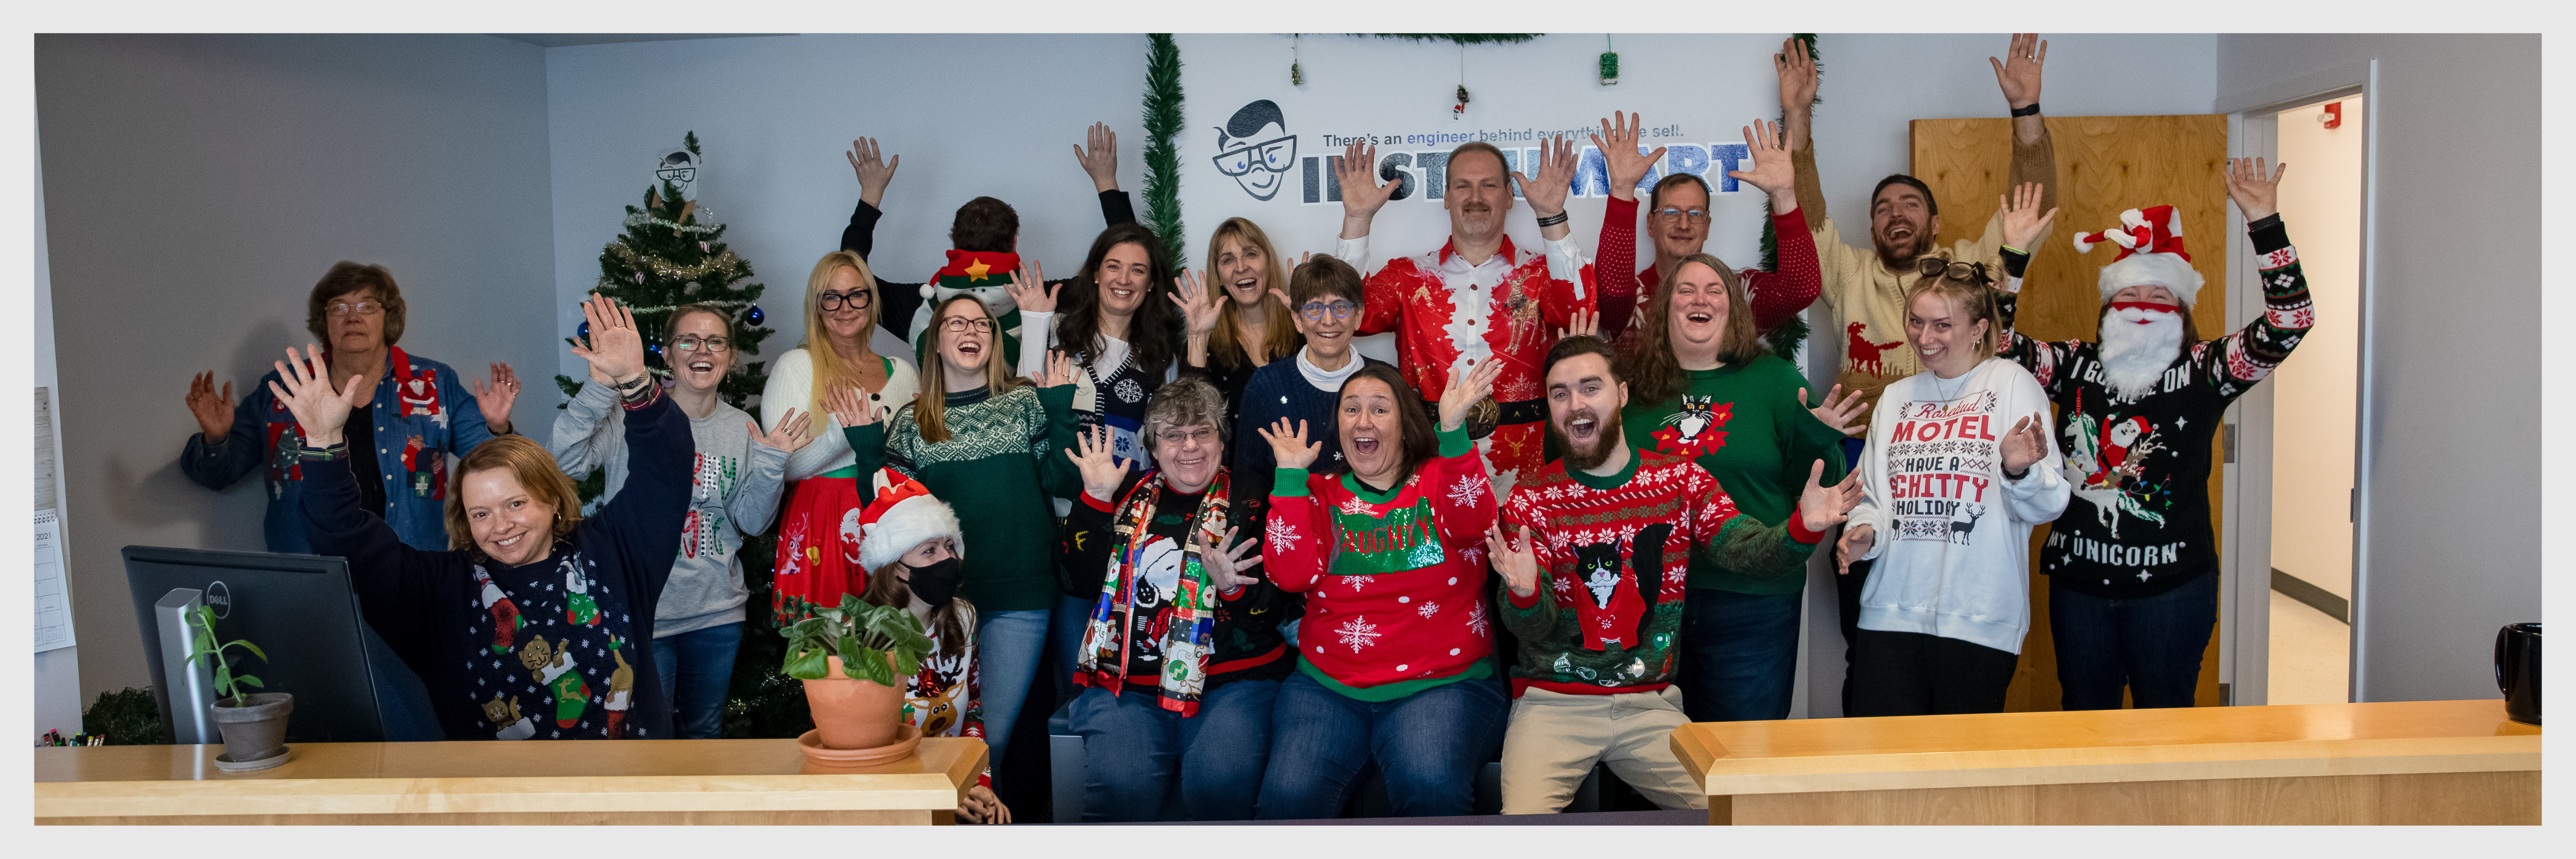 Photo of Instrumart employees doing a goofy pose in holiday sweaters.